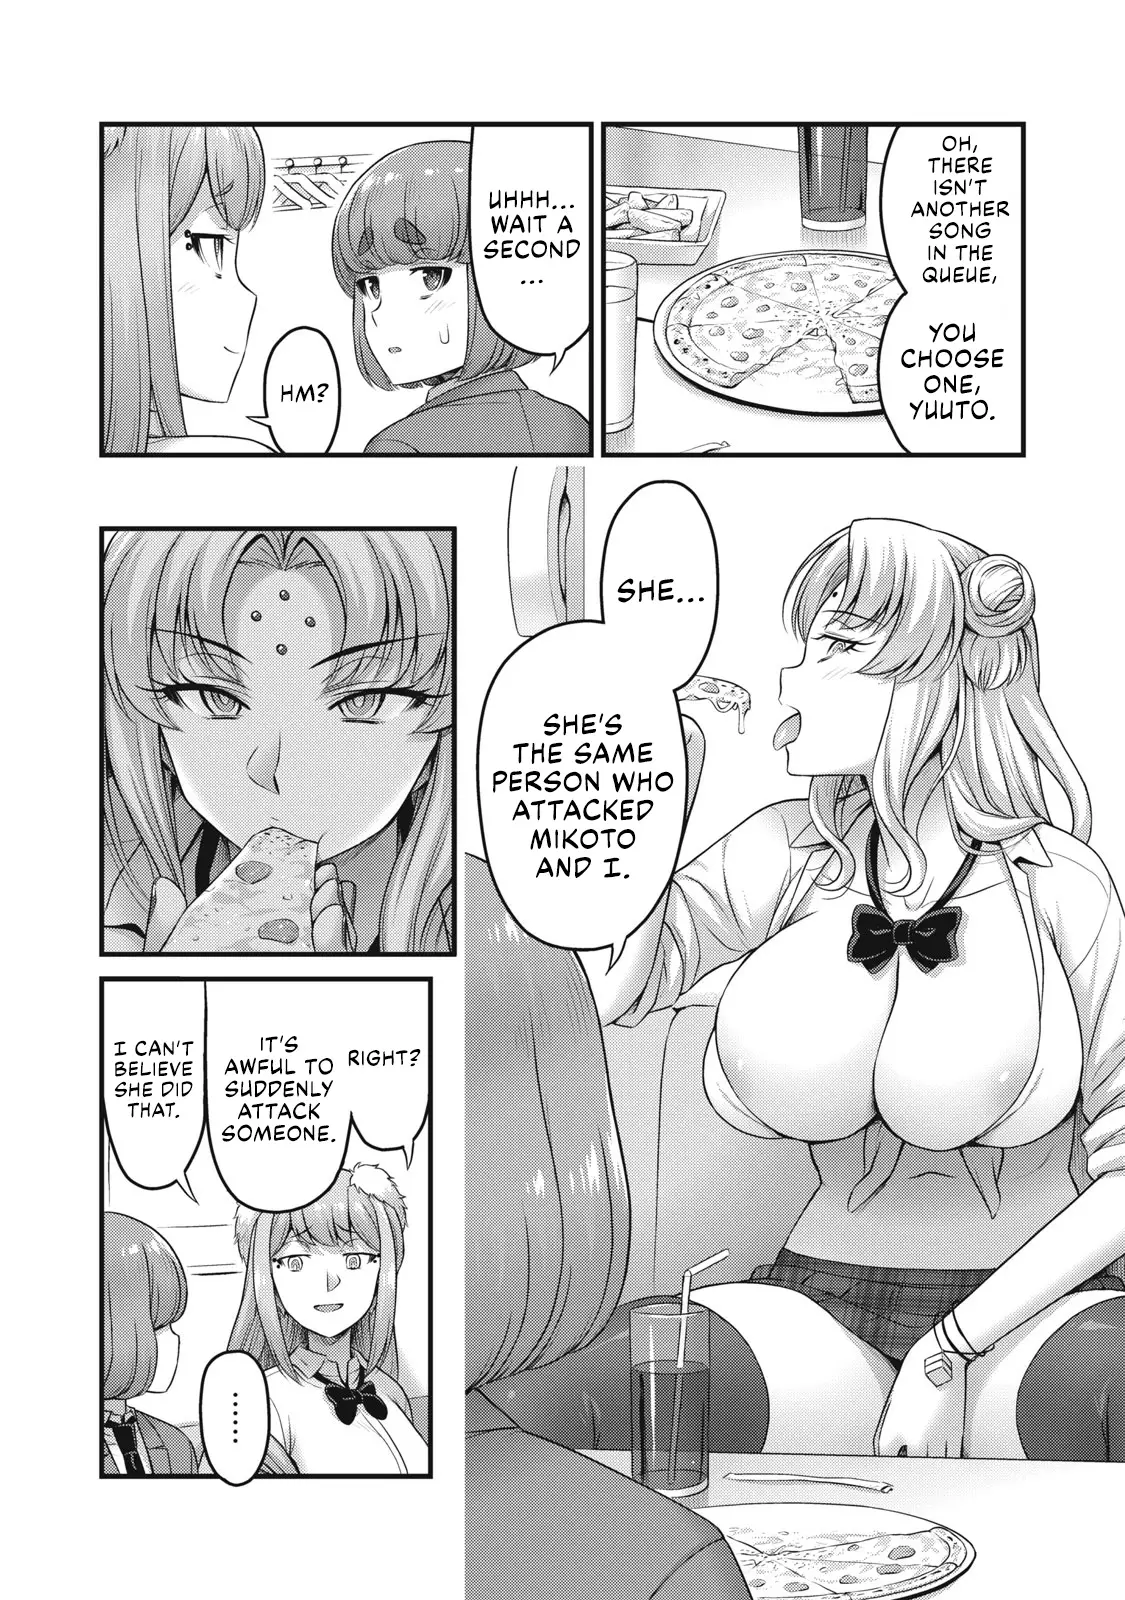 Queen's Seed - 11 page 3-63751055